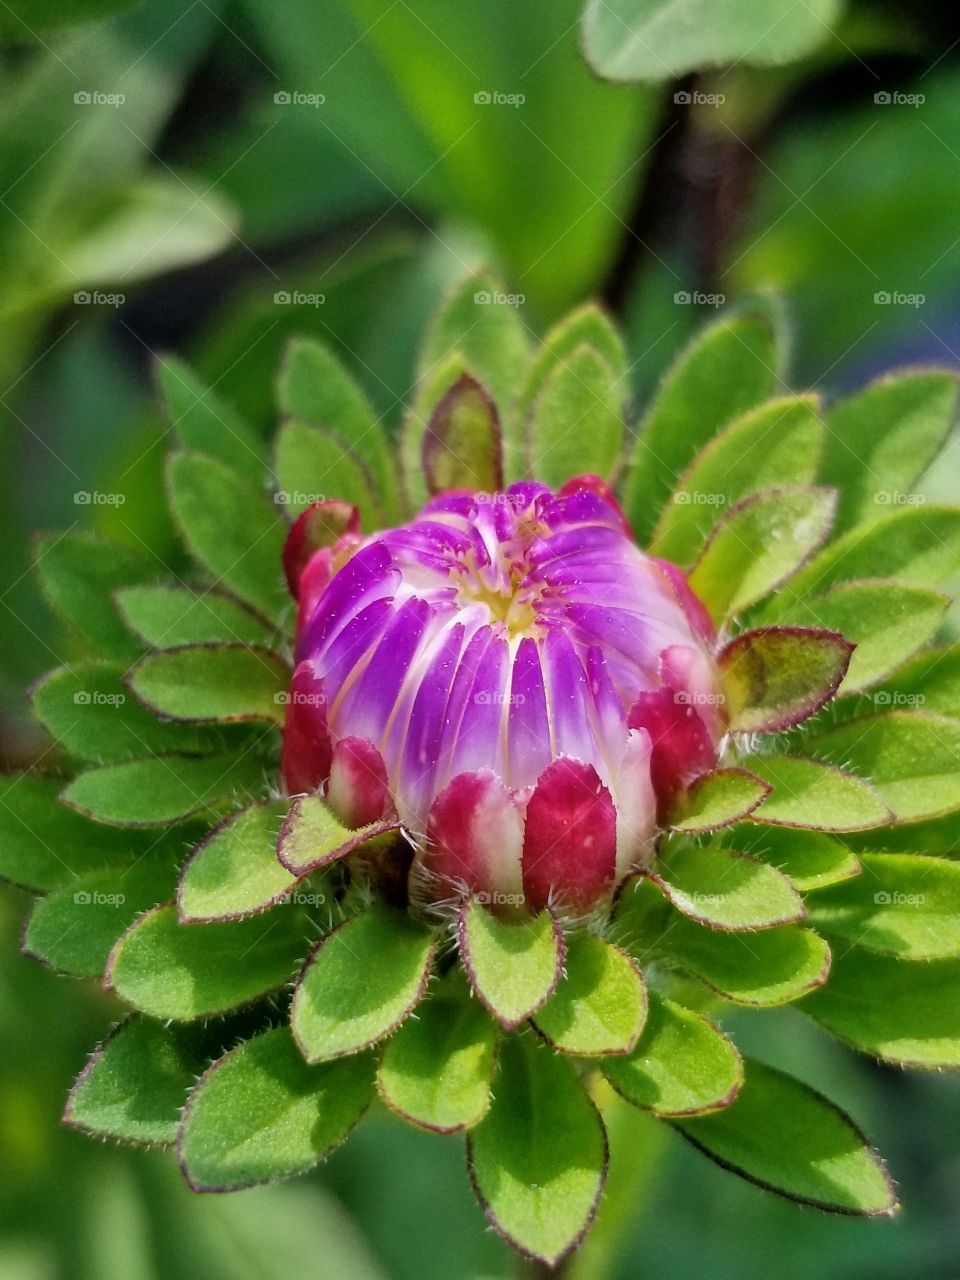 flower Bud ready to bloom